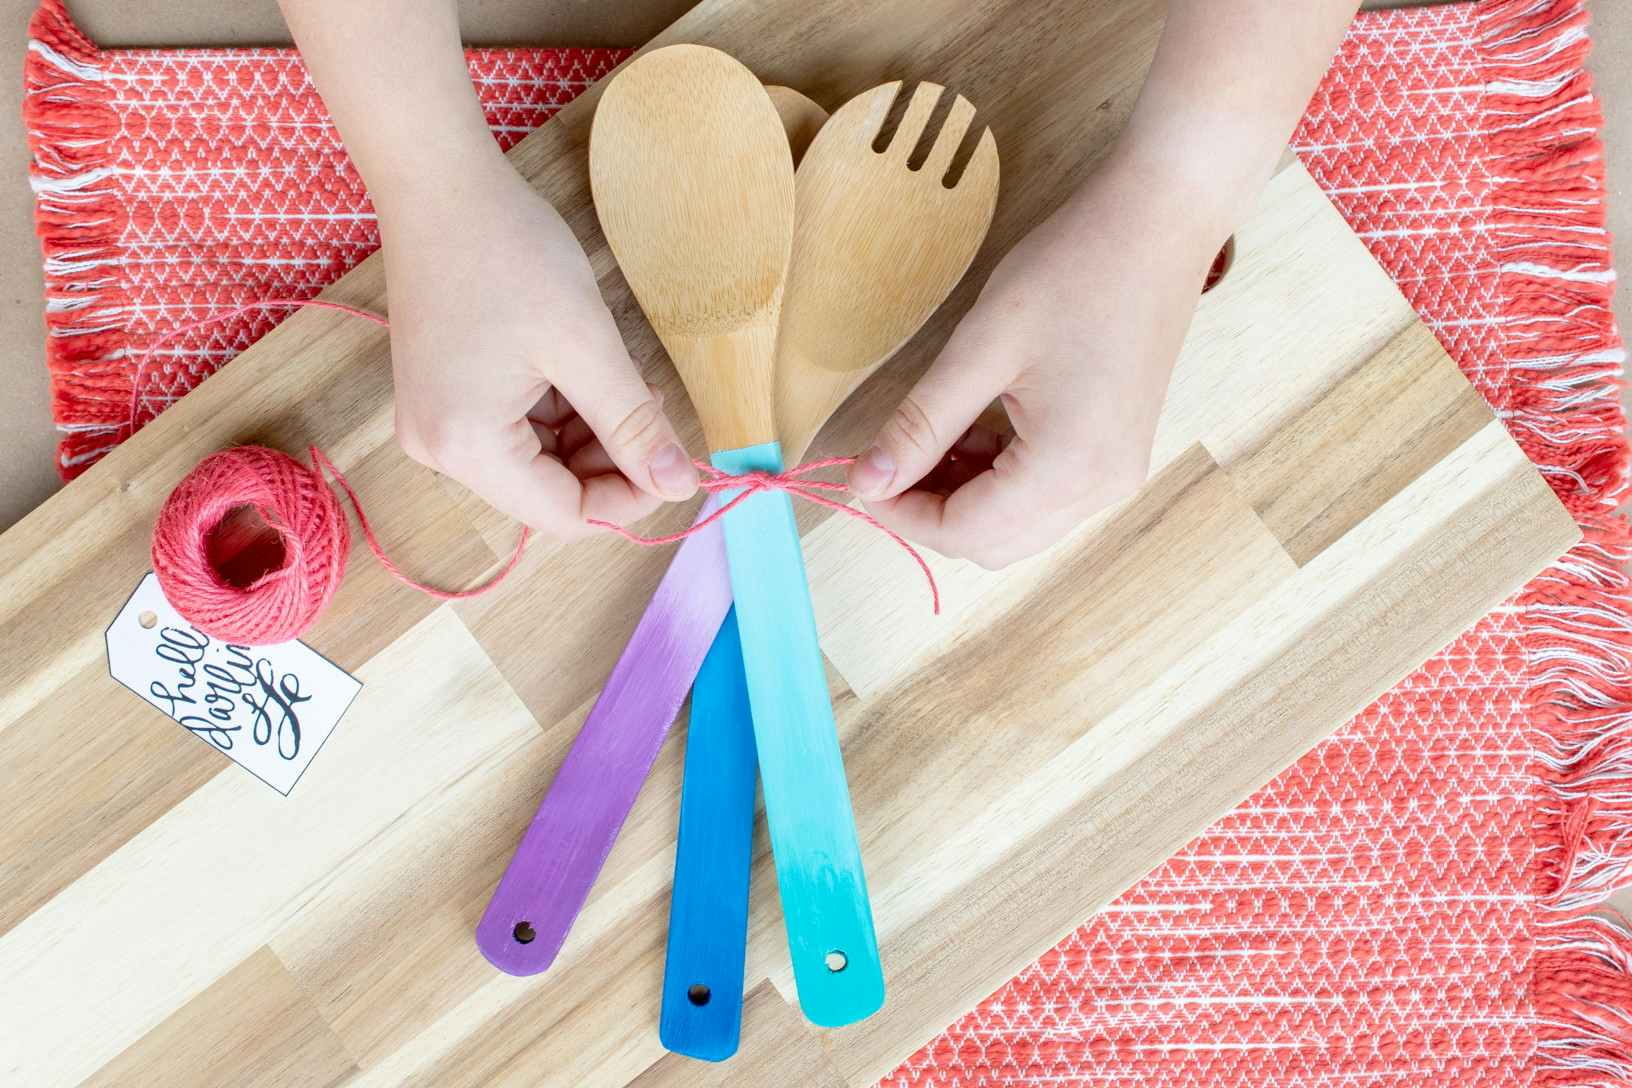 https://prod-cdn-thekrazycouponlady.imgix.net/wp-content/uploads/2018/07/08-1-diy-gifts-under-five-dollars-ombre-wooden-spoons-1530554784-e1530642465189.jpg?auto=format&fit=fill&q=25